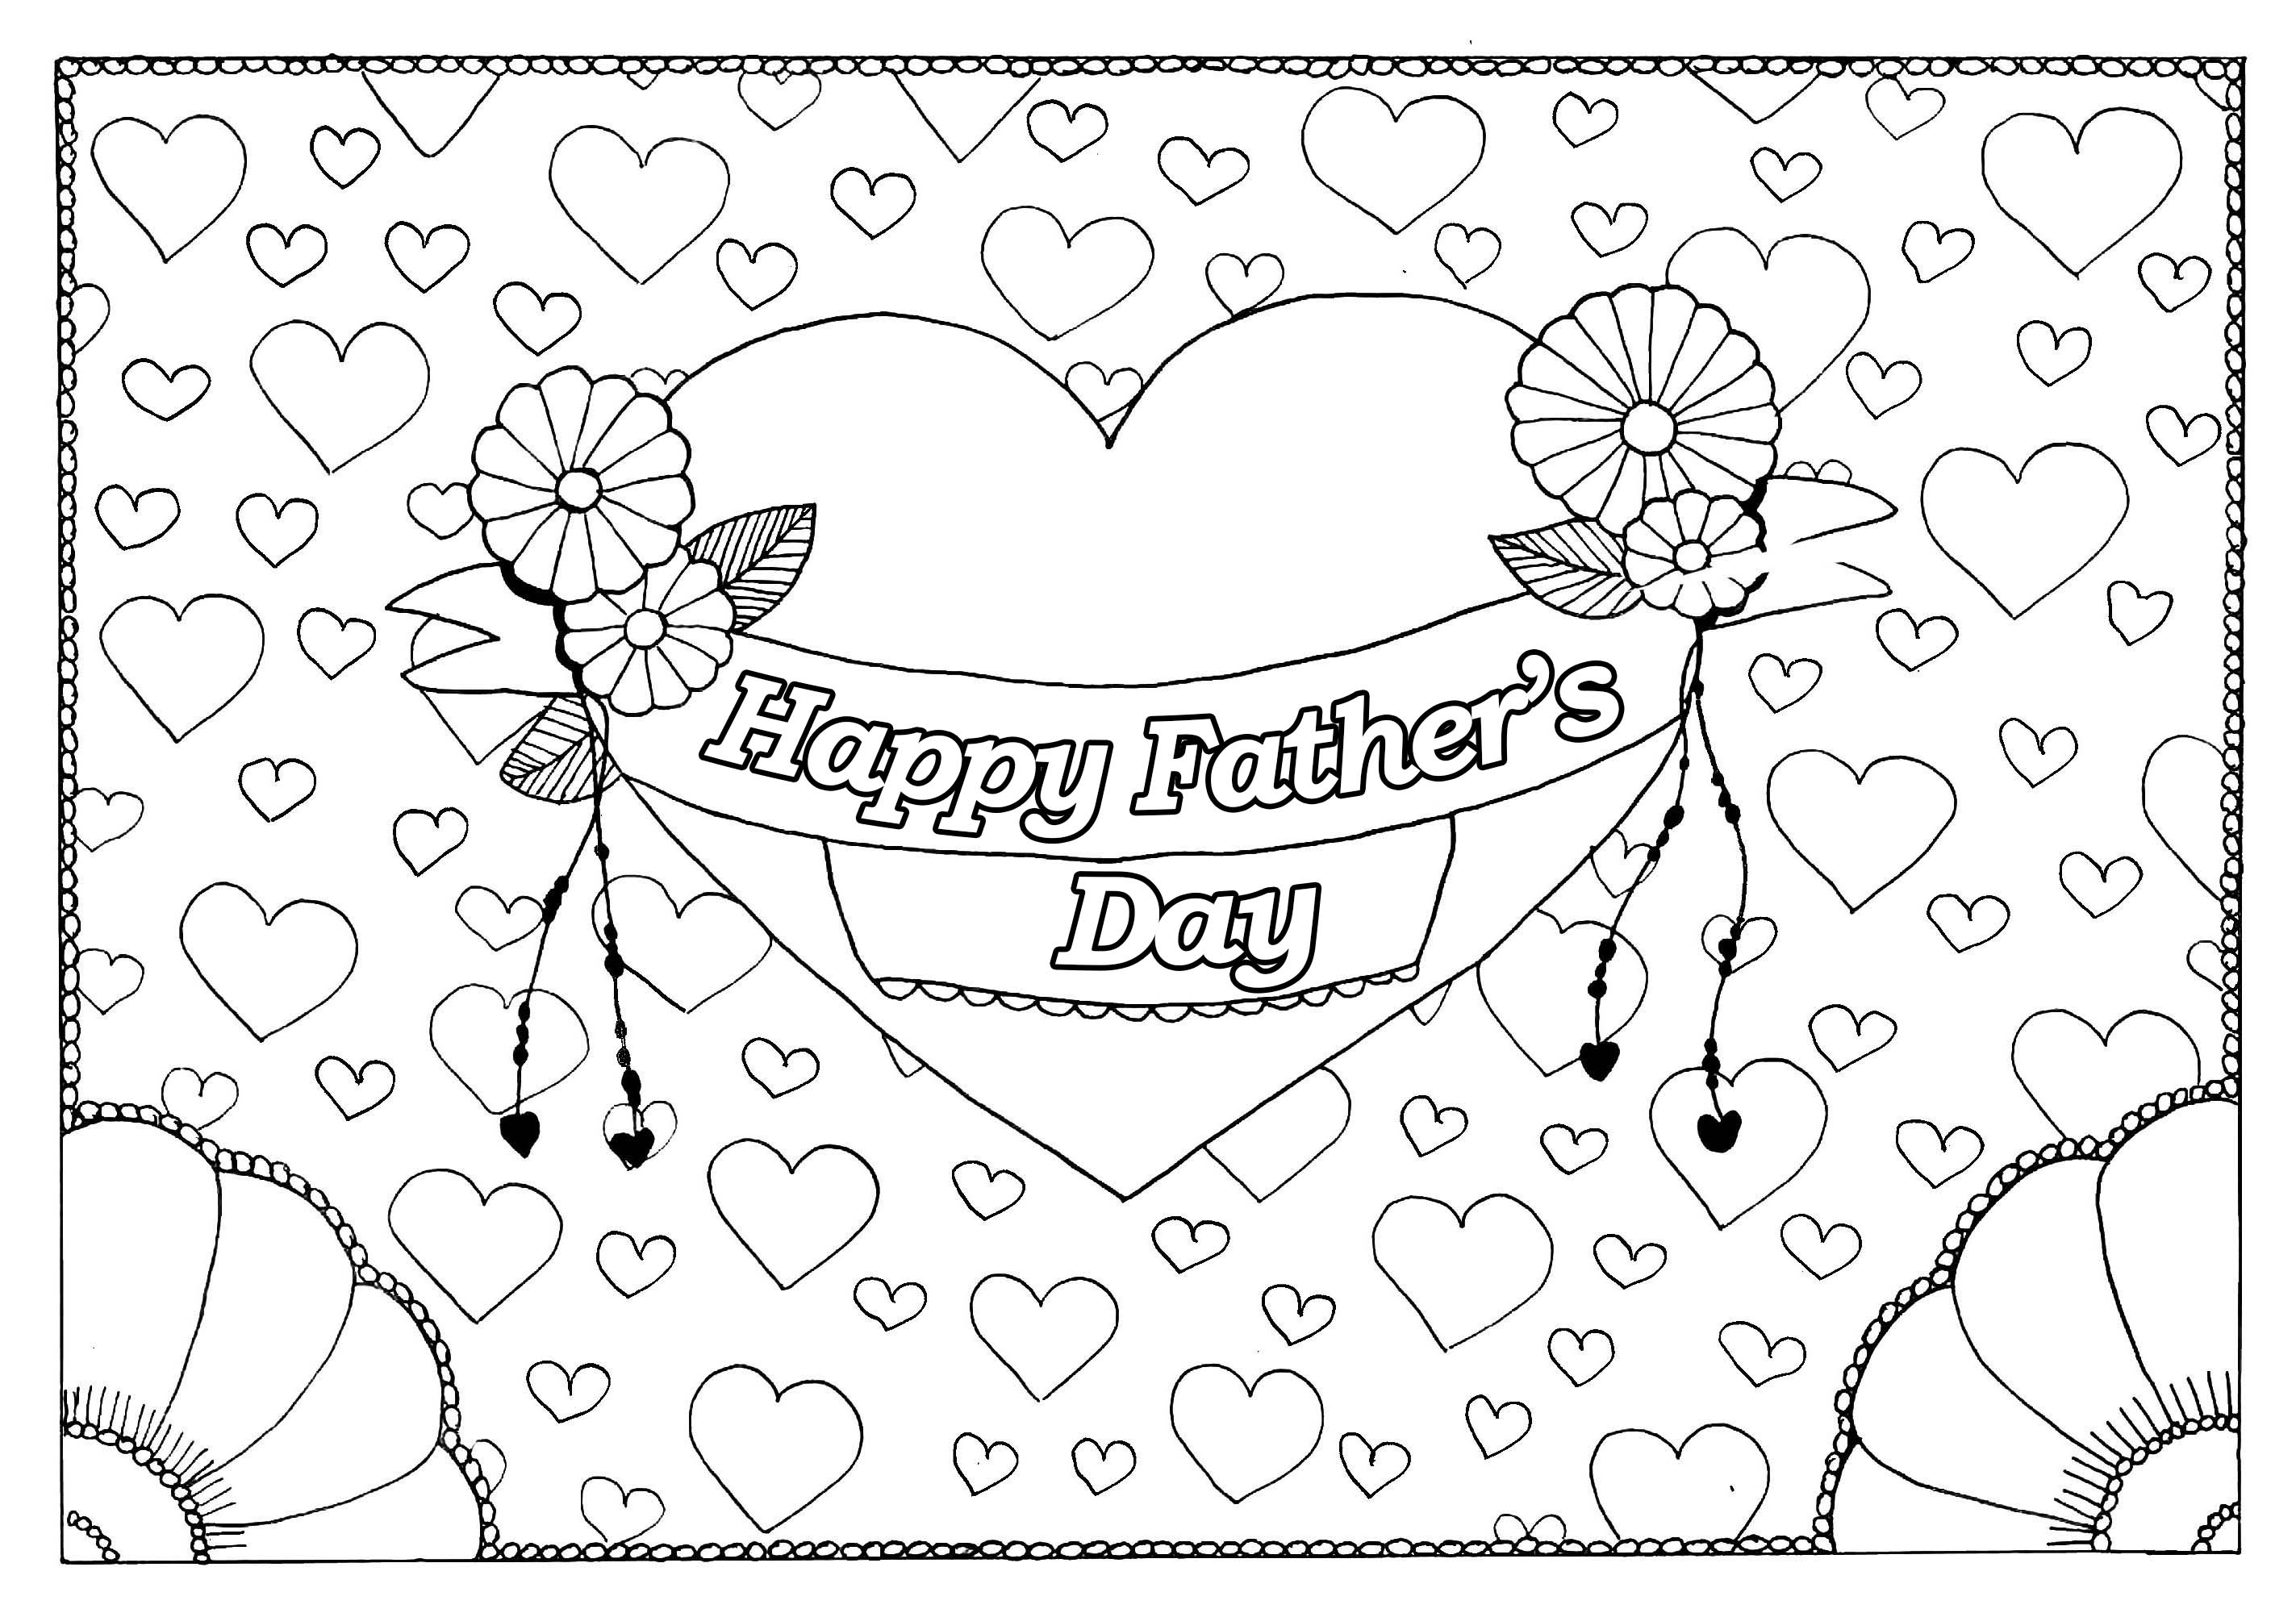 Father's day coloring page : Big & little hearts, Artist : Pauline